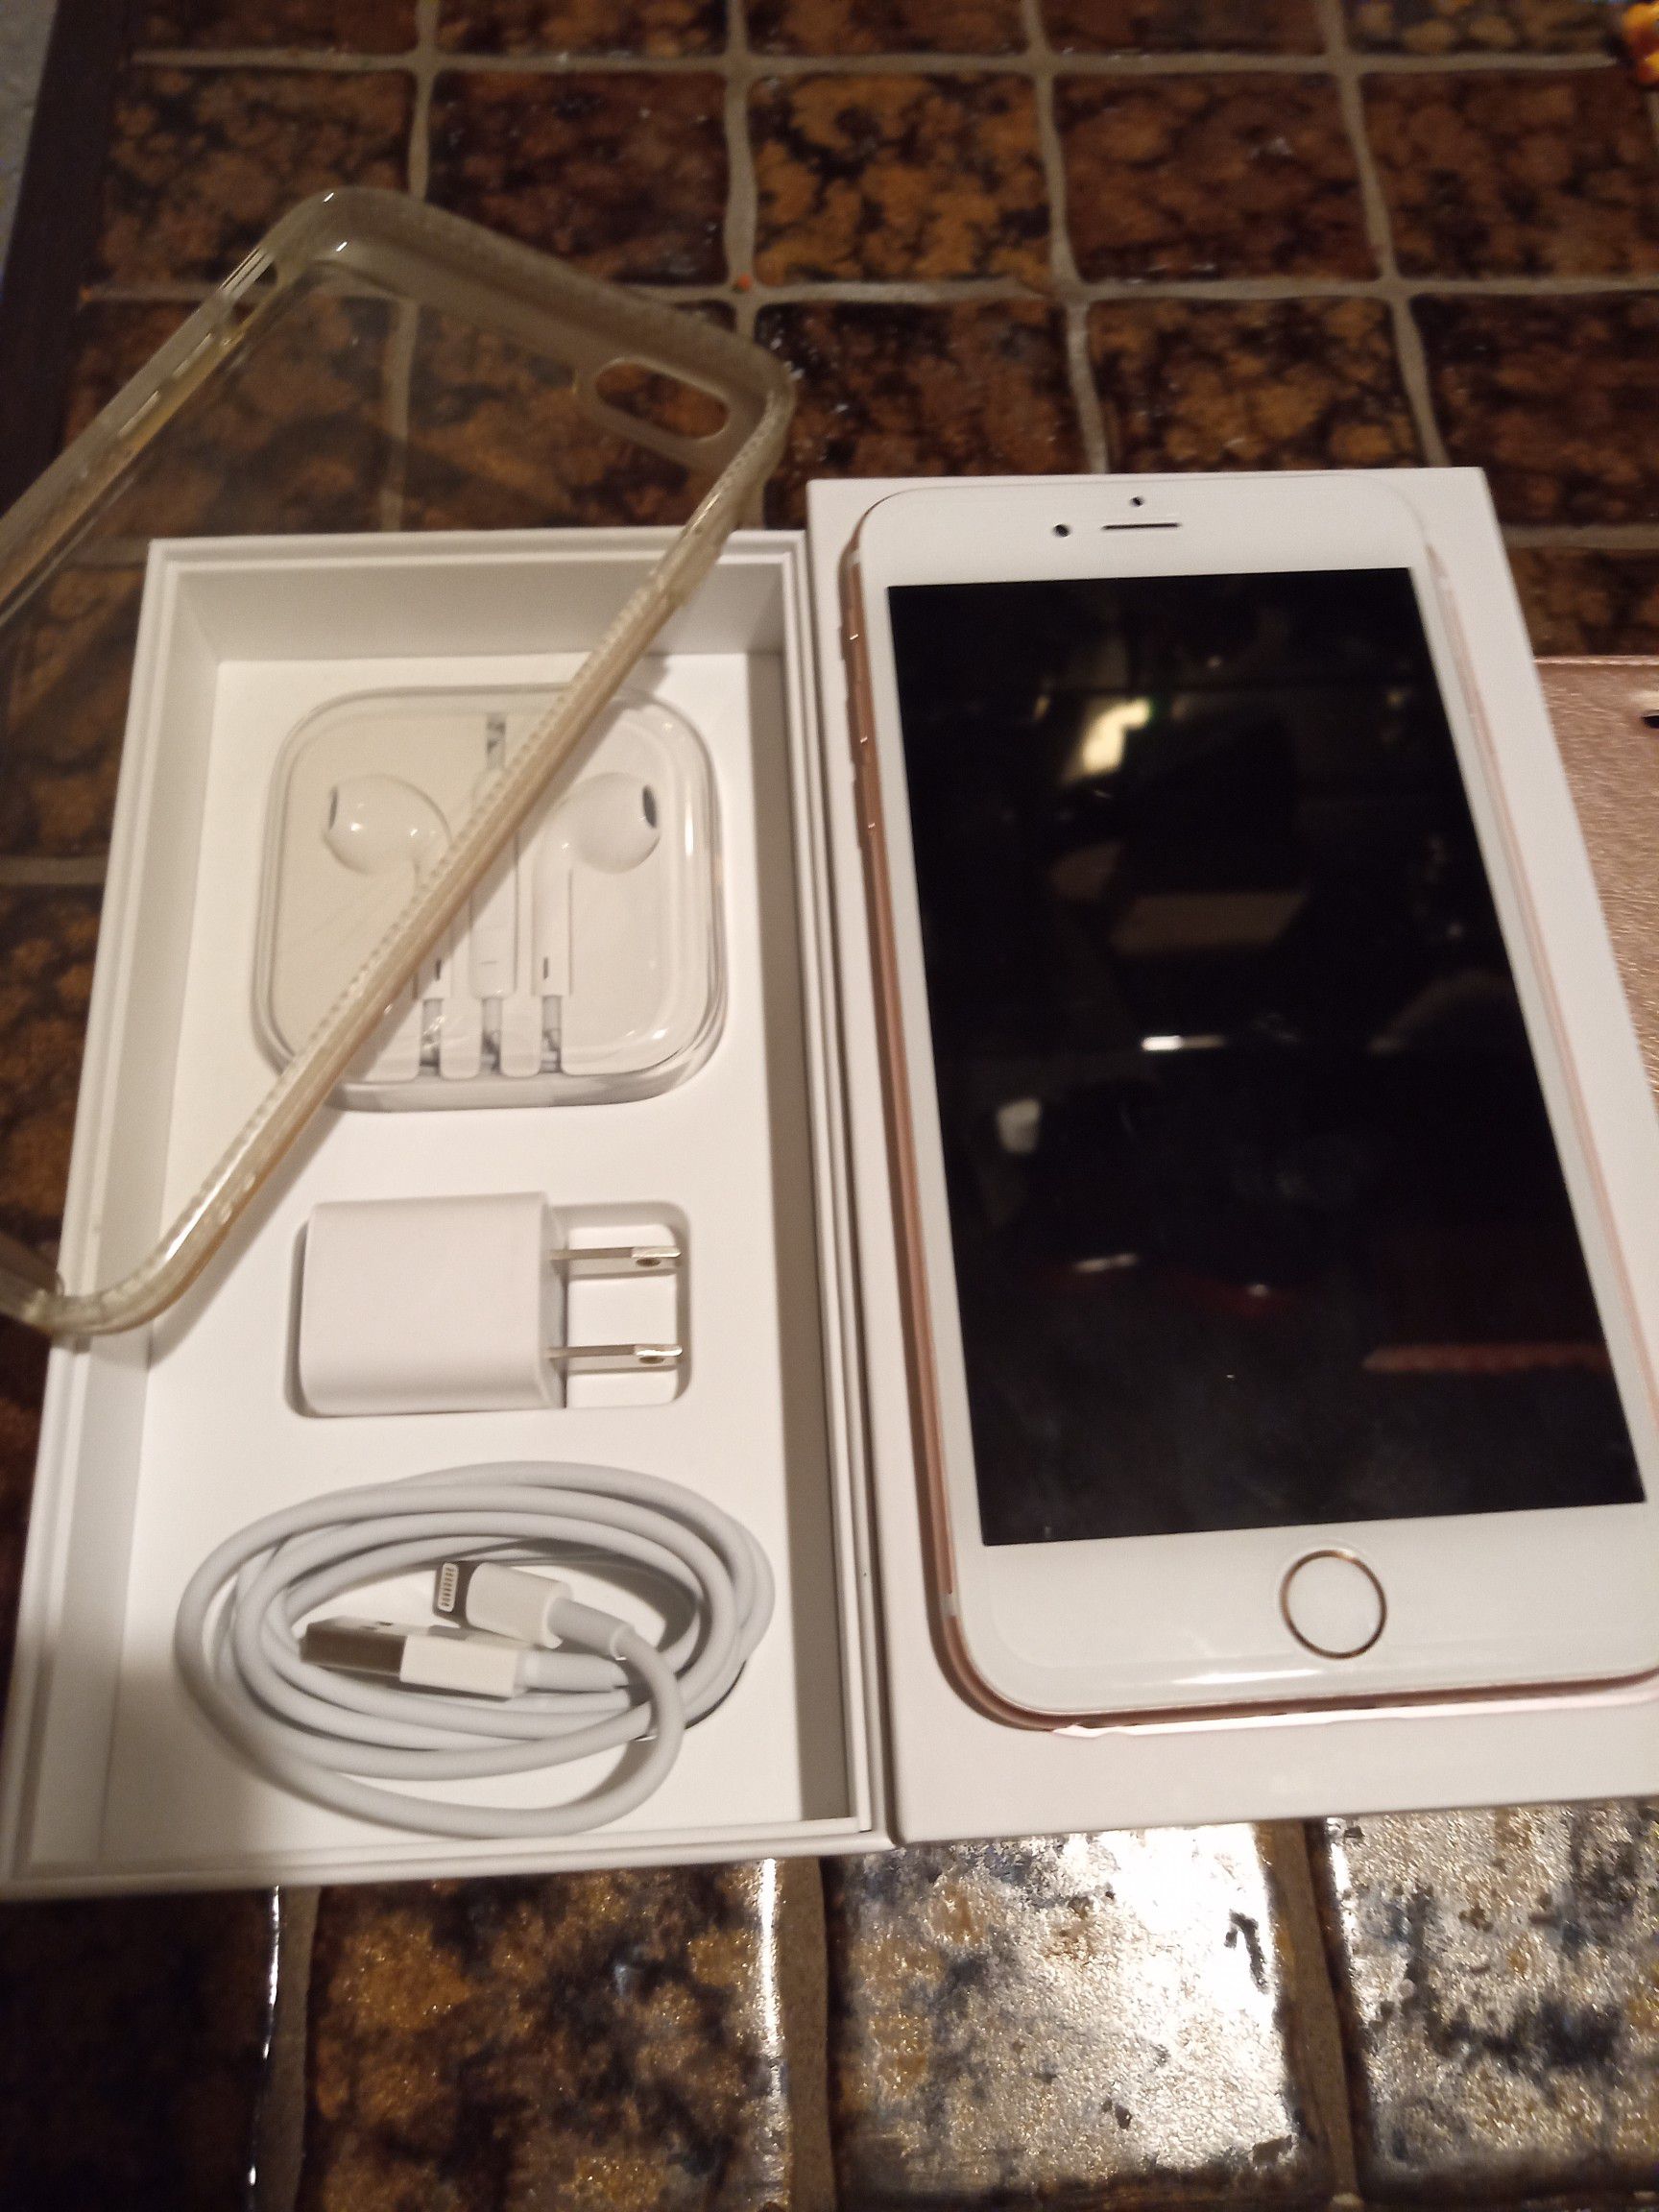 iPhone 6S plus Sprint unlocked 32GB AT&T/T-Mobile with Box and accessories